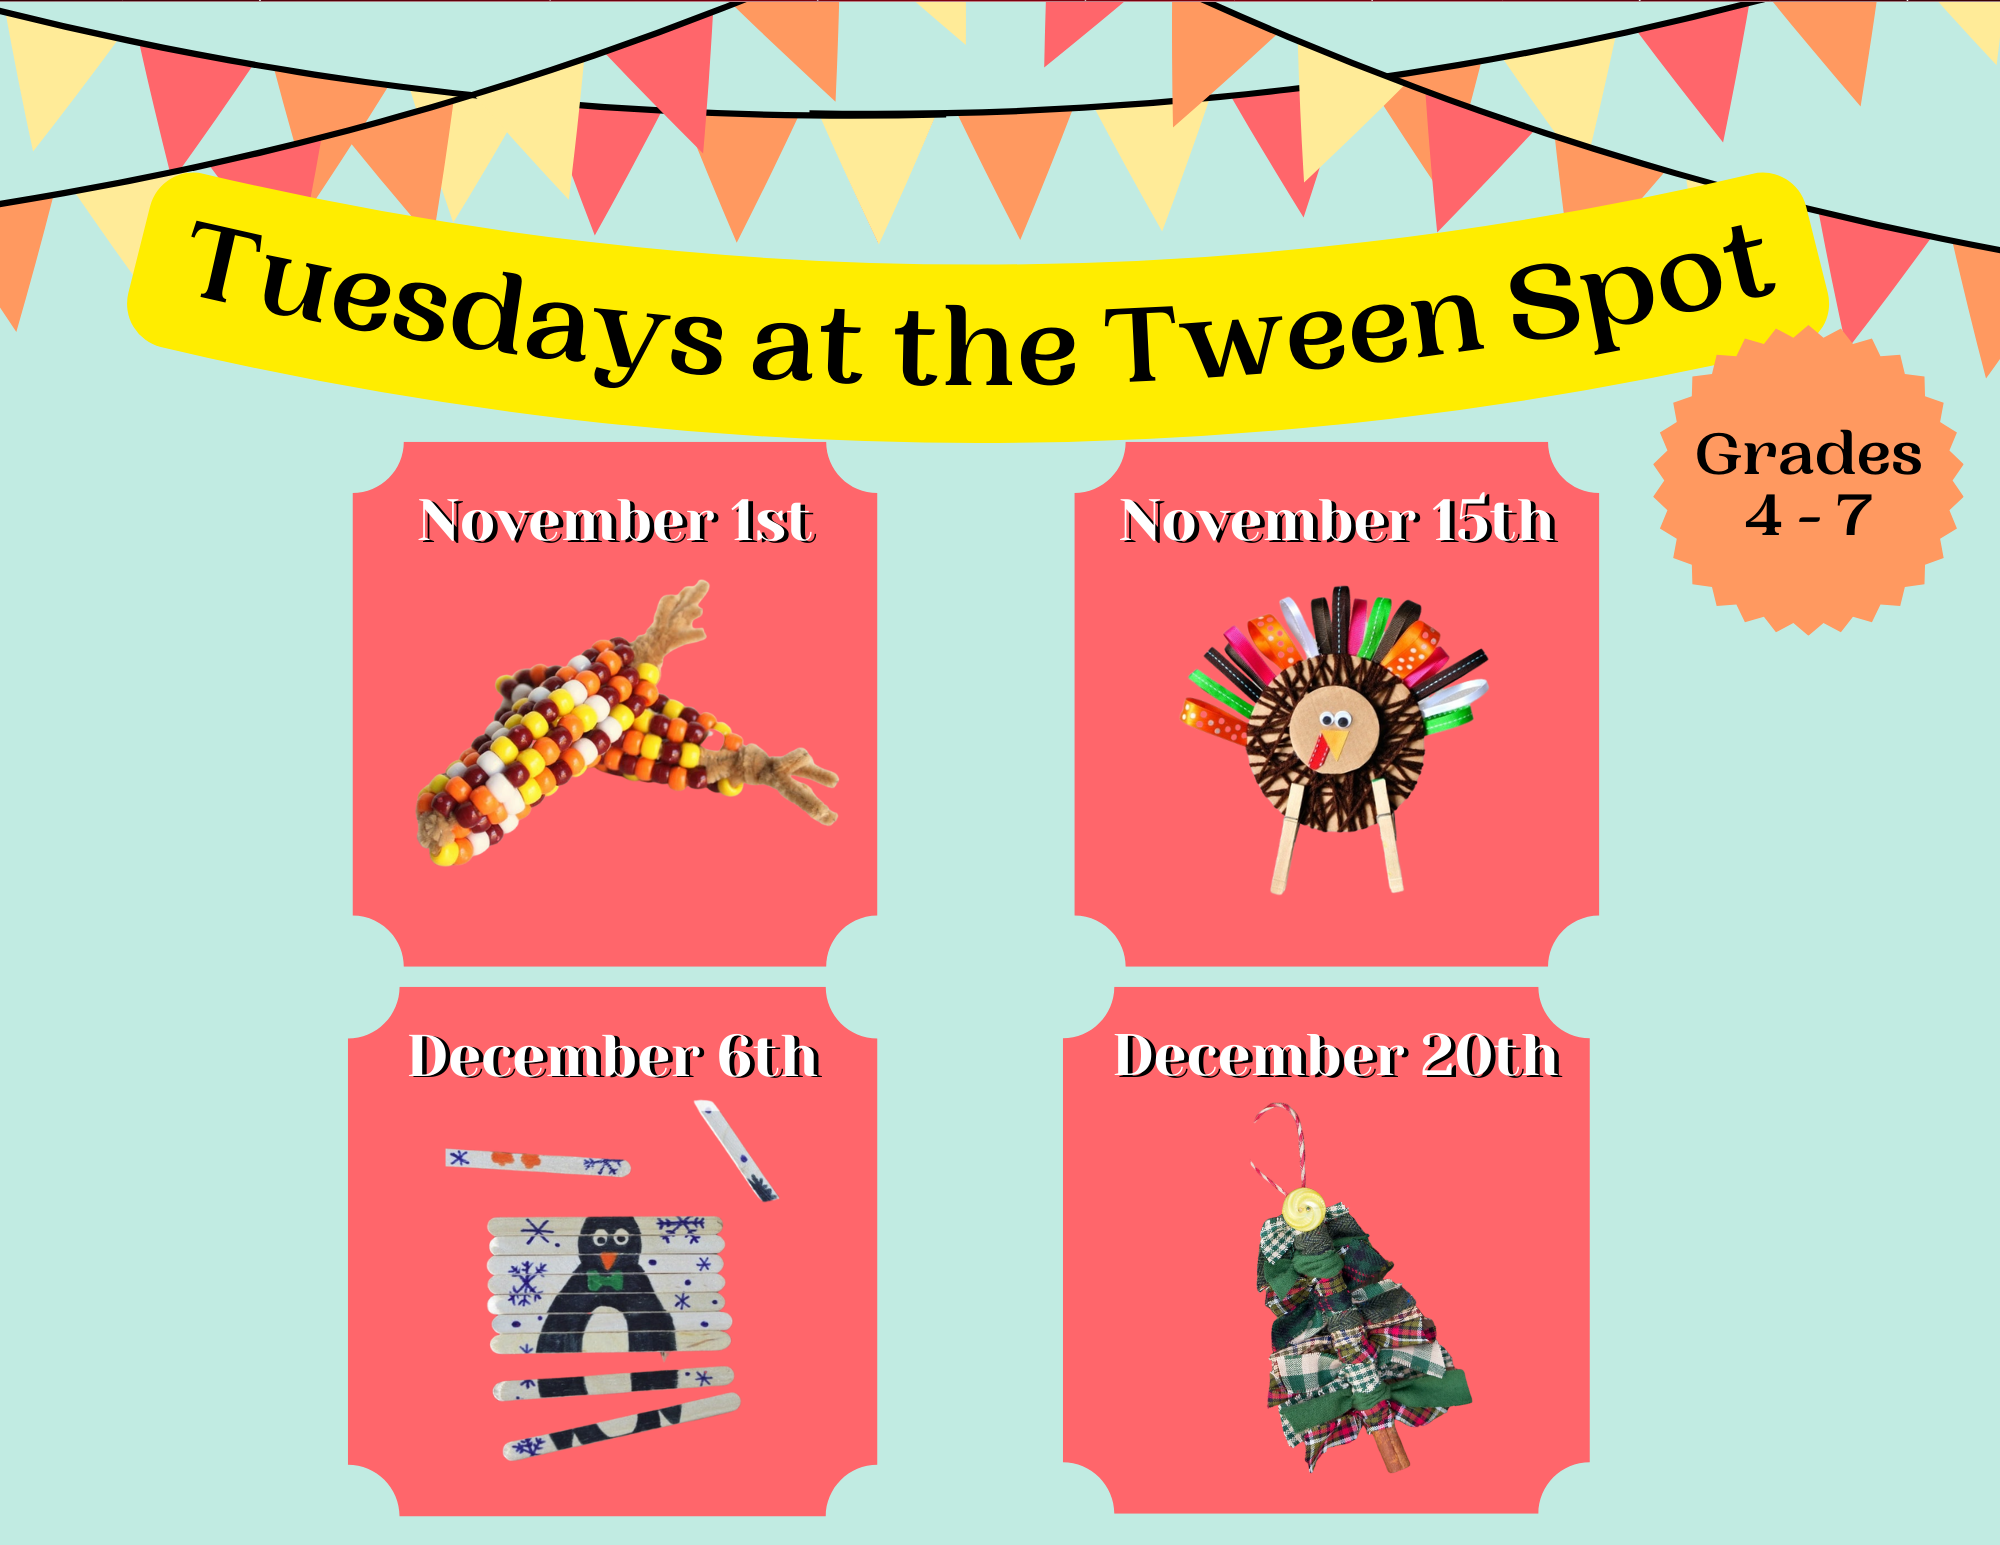 Program flyer featuring the following text "Tuesdays at the Tween Spot. Grades 4-7. November 1st & 15th. December 6th & 20th."